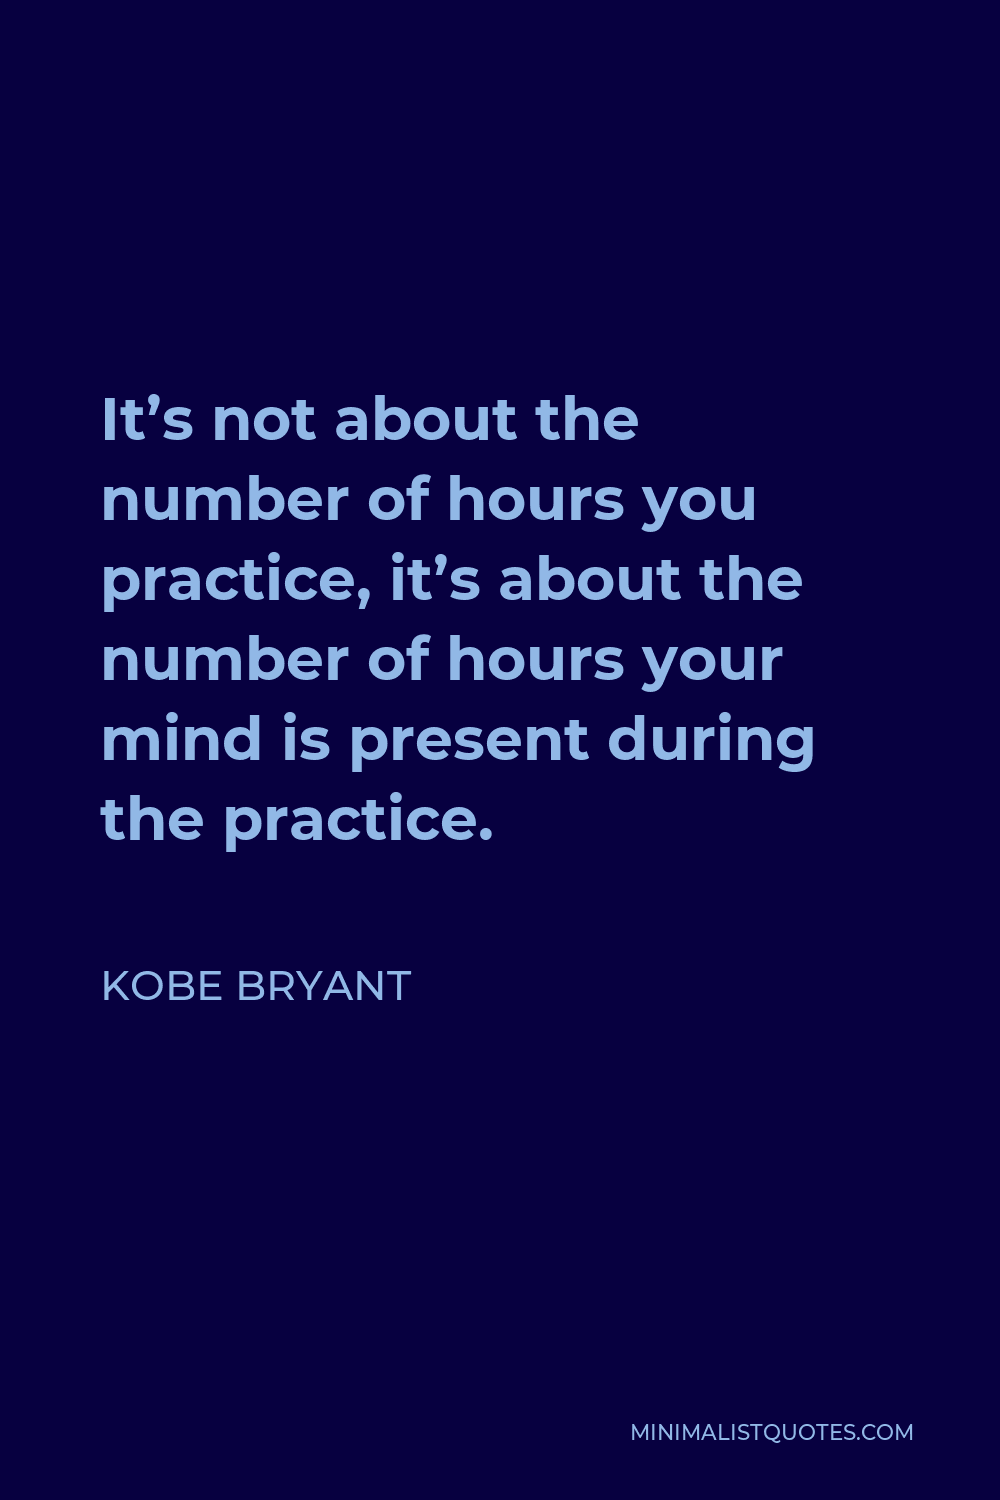 Kobe Bryant Quote - It’s not about the number of hours you practice, it’s about the number of hours your mind is present during the practice.